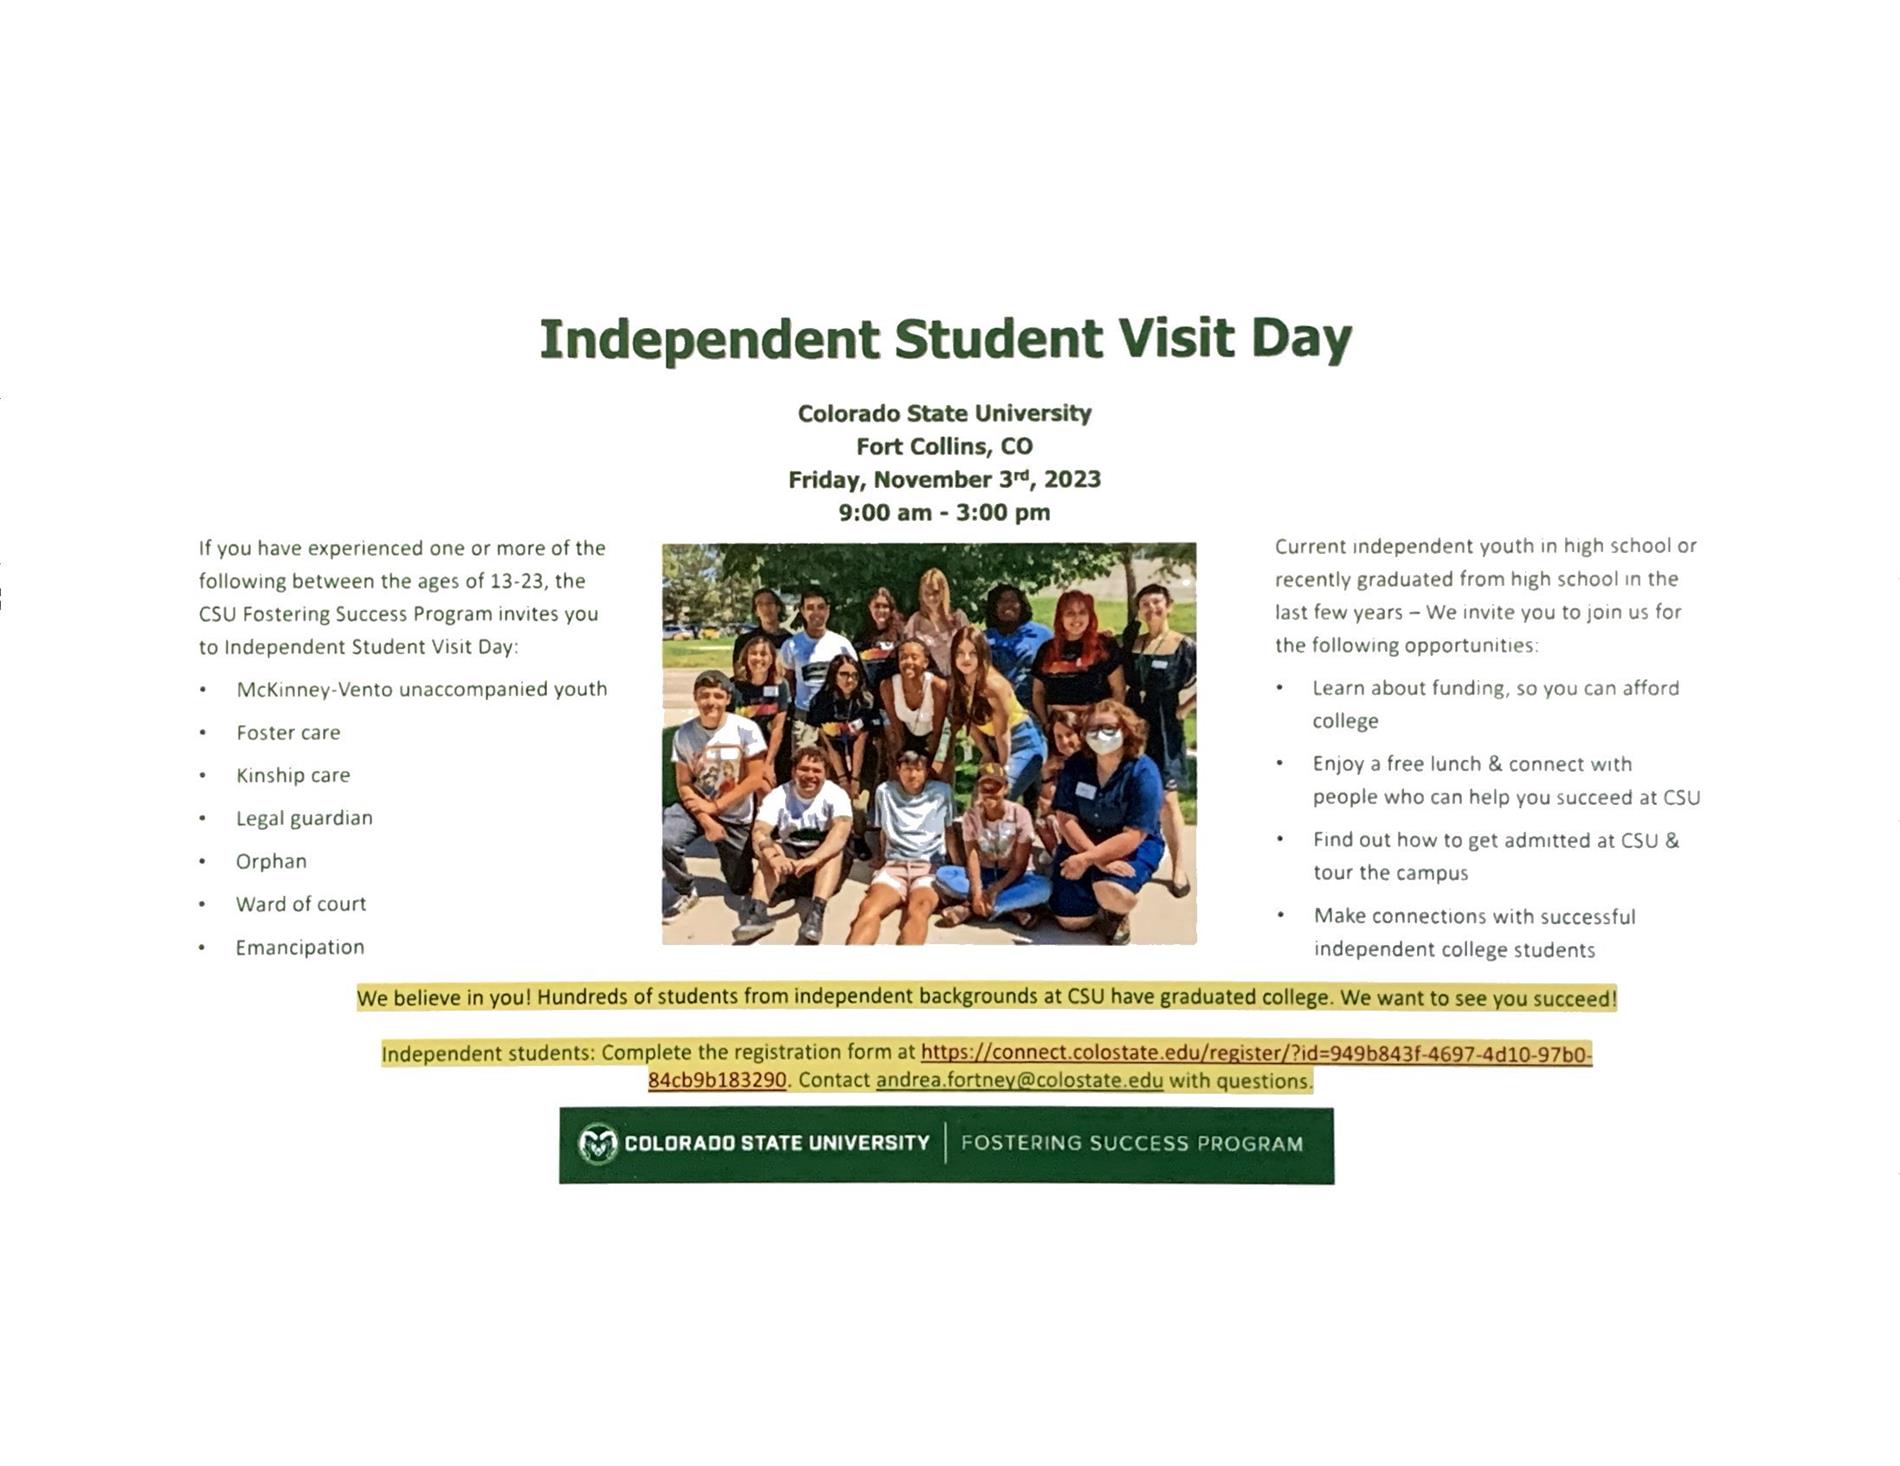 Independent Student Visit Day Colorado State University Fort Collins, CO Friday,November 3rd,2023 9:00 am - 3:00 pm If you have experienced one or more of the following between the ages of 13-23, the CSU Fostering Success Program invites you to Independent Student Visit Day: McKinney -Vento unaccompanied youth Foster care Kinship care Legal guardian Orphan Ward of court Emancipation  Current independent youth in high school or recently graduated from high school in the last few years - We invite you to Join us for the following opportunities. Learn about funding, so you can afford college EnJoy a free lunch & connect with people who can help you succeed at CSU Find out how to get admitted at CSU & tour the campus Make connections with successful independent college students  We believe in you! Hundreds of students from independent backgrounds at CSU have graduated college. We want to see ou succeedI  Independent students : Complete the regIstratIon form at https:// connect.colostate.edu/reg1ster/? 1d=949b8 43f-4697-4d10-97b01 84cb9b183290. Contact andrea.fortney@colostate.edu with questions